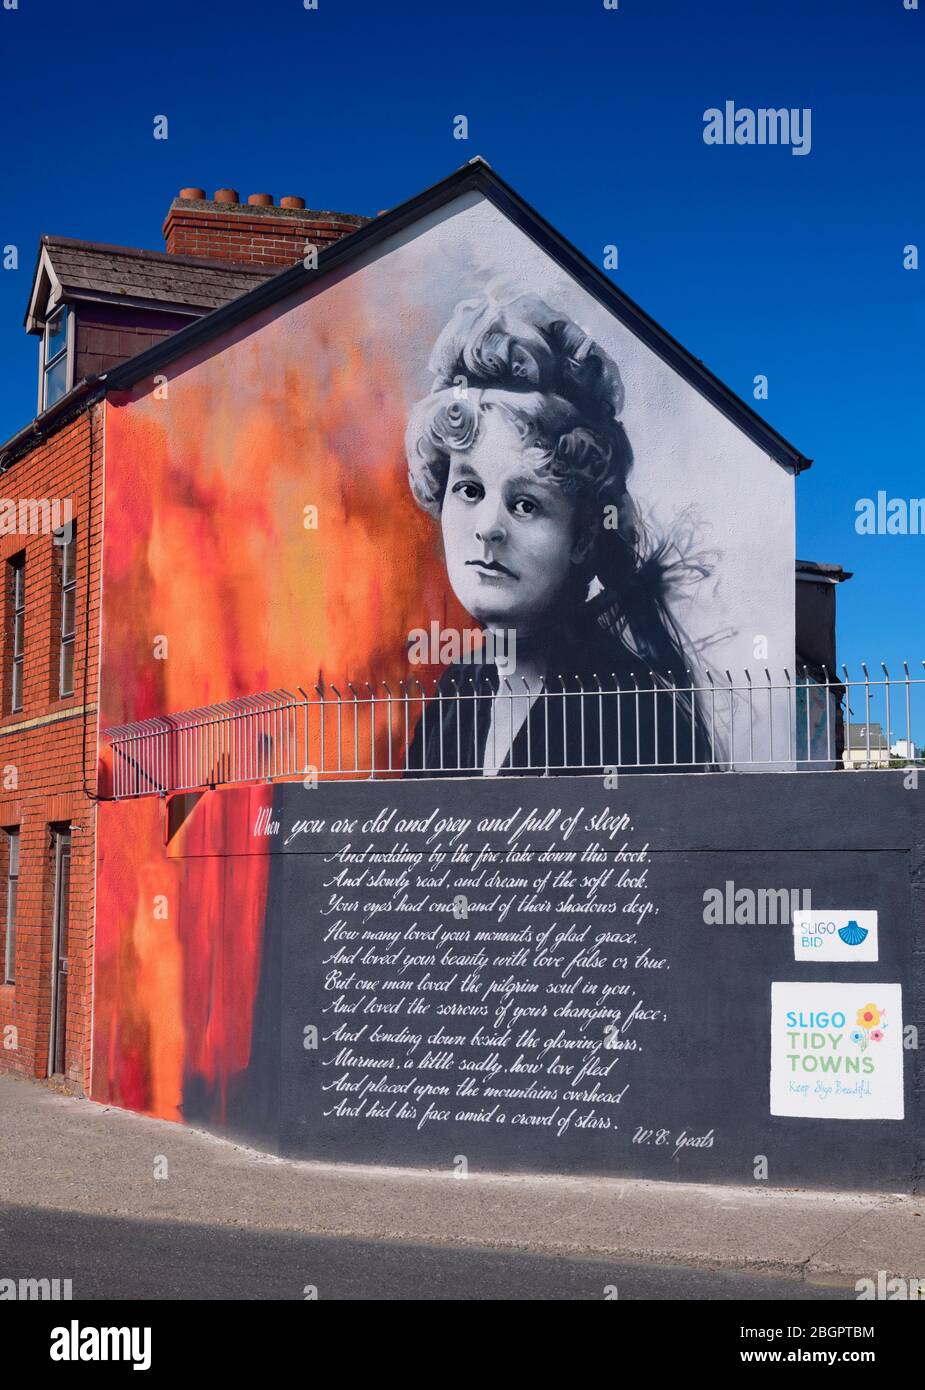 Ireland, County Sligo, Sligo town, Wall mural of Maud Gonne by the artist Nick Purdy with a poem by W B yeats titled When you are old. Stock Photo